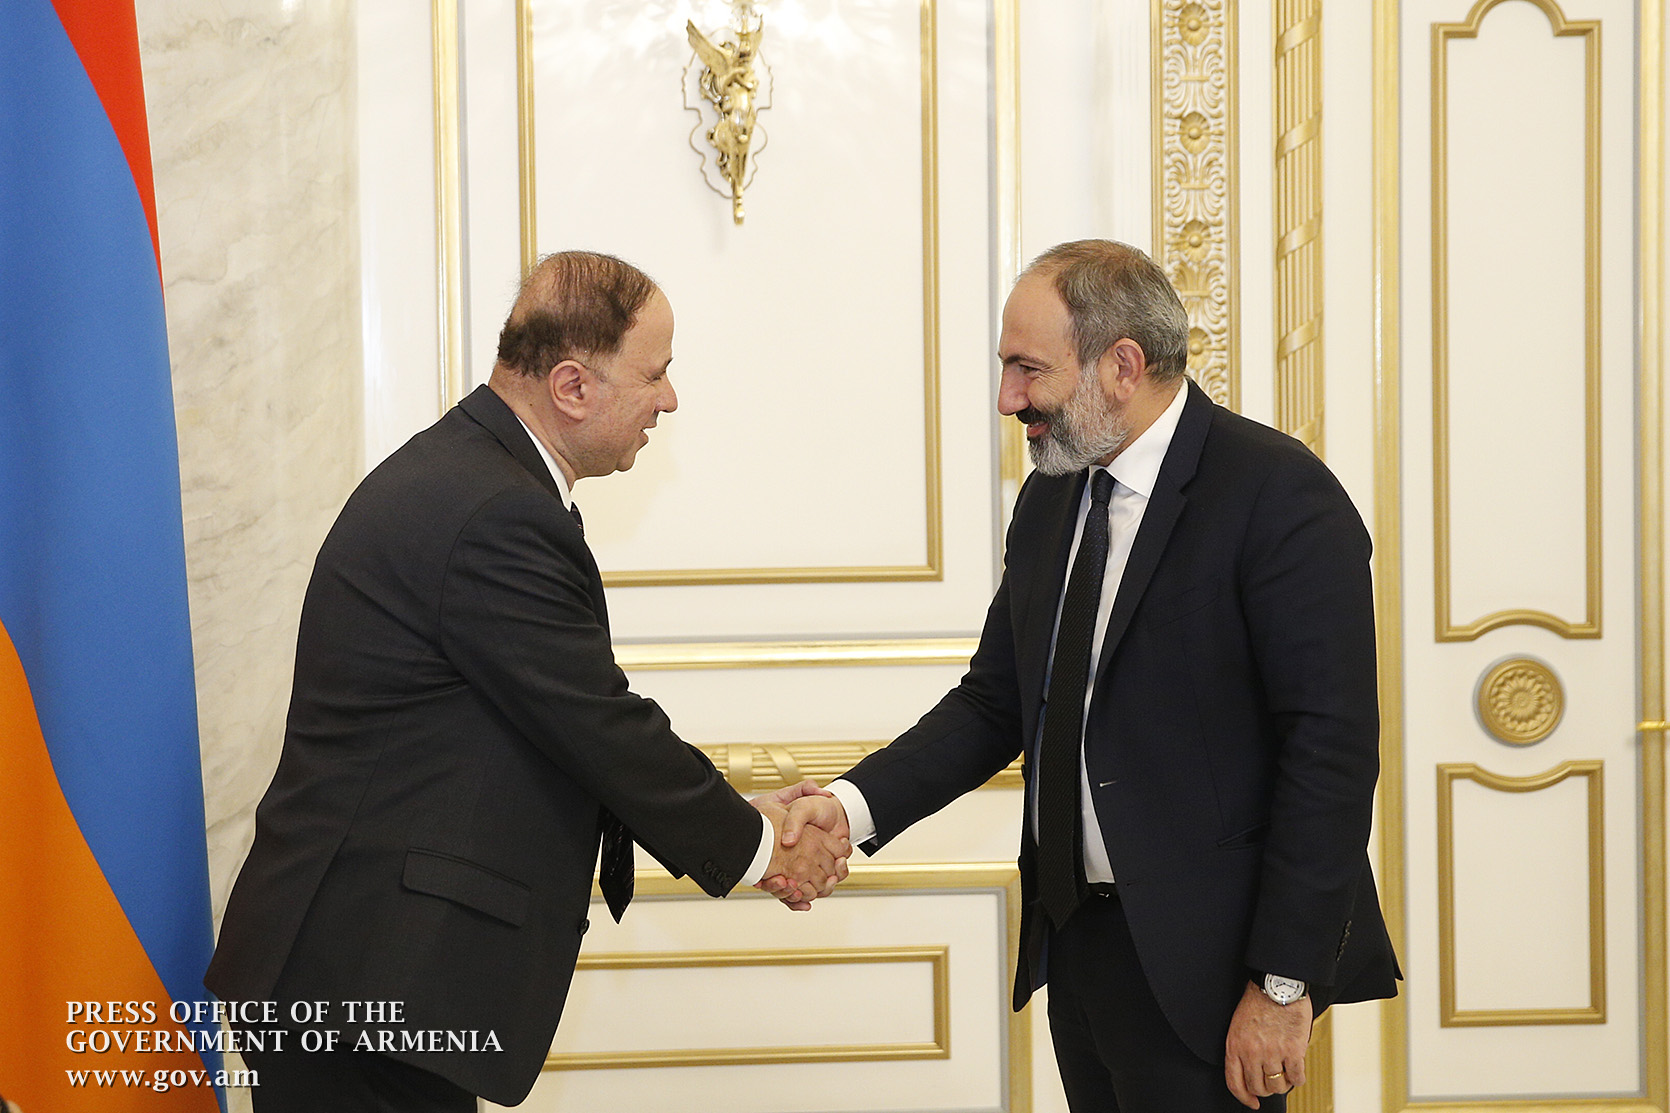 Acting PM receives U.S.-Armenian philanthropist Mike Sarian, President of Operations at Prime Healthcare Services, Inc.